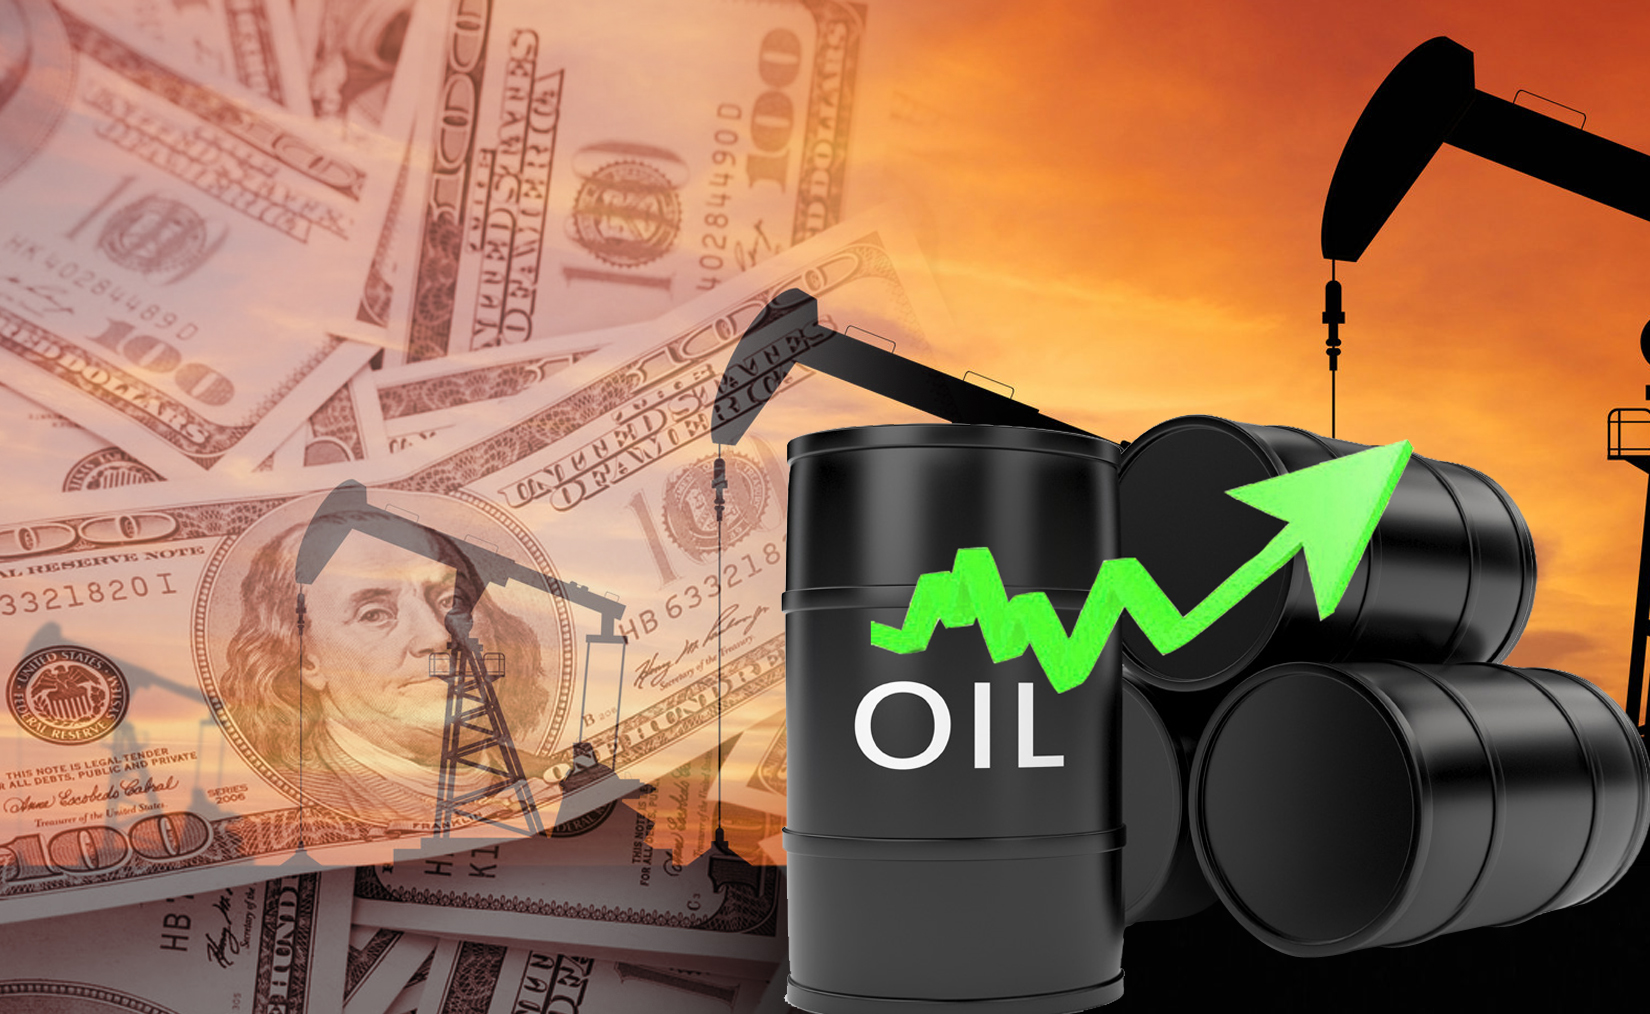 Kuwait oil price up 34 cents to USD 63.22 pb                                                                                                                                                                                                              